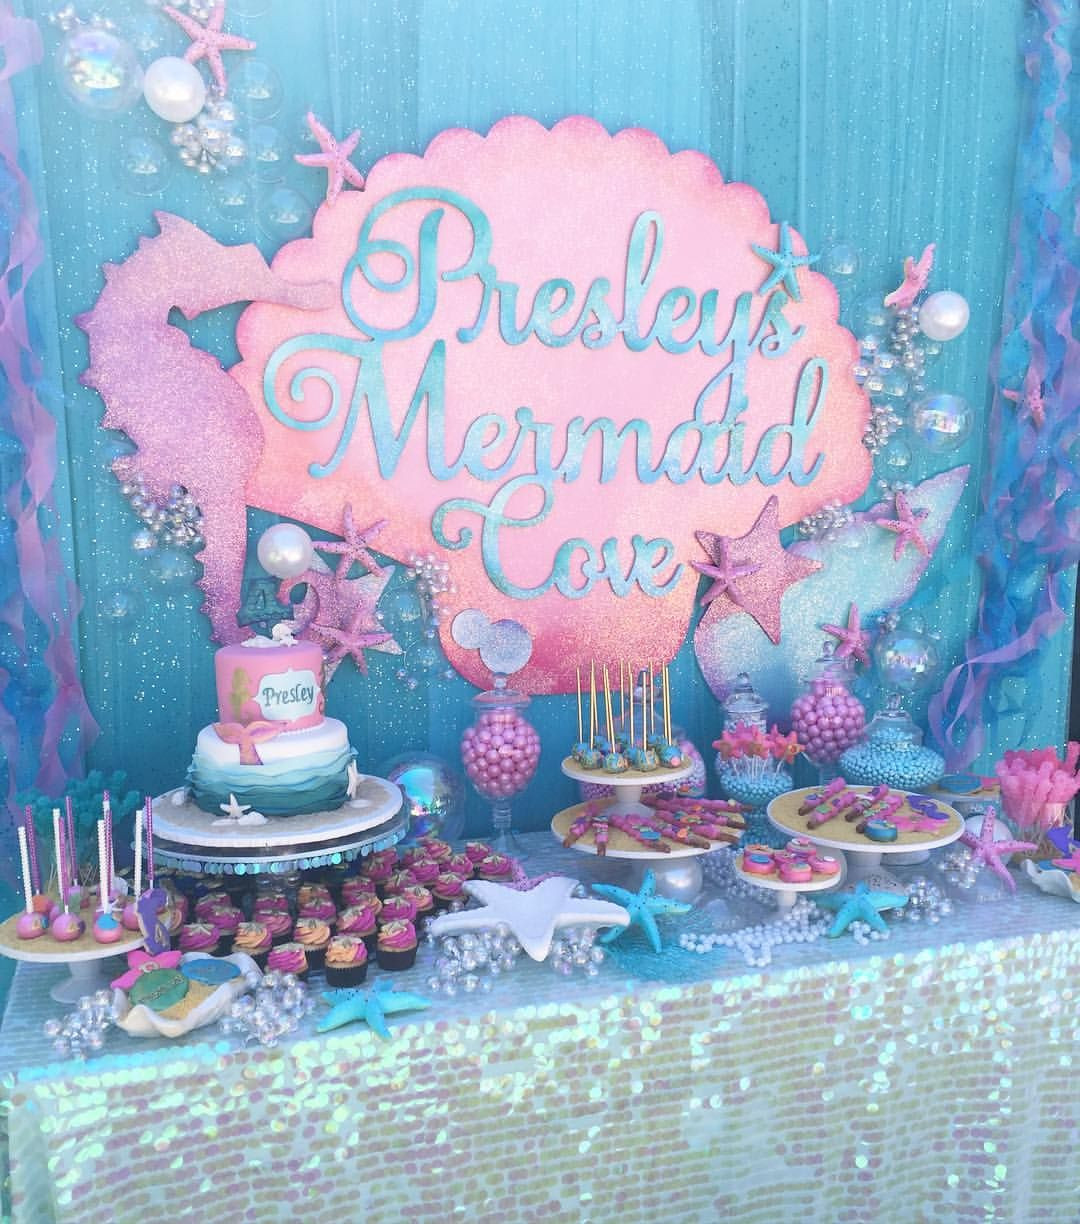 Mermaid Party Decorations Ideas
 Up bright and early for the most adorable mermaid party